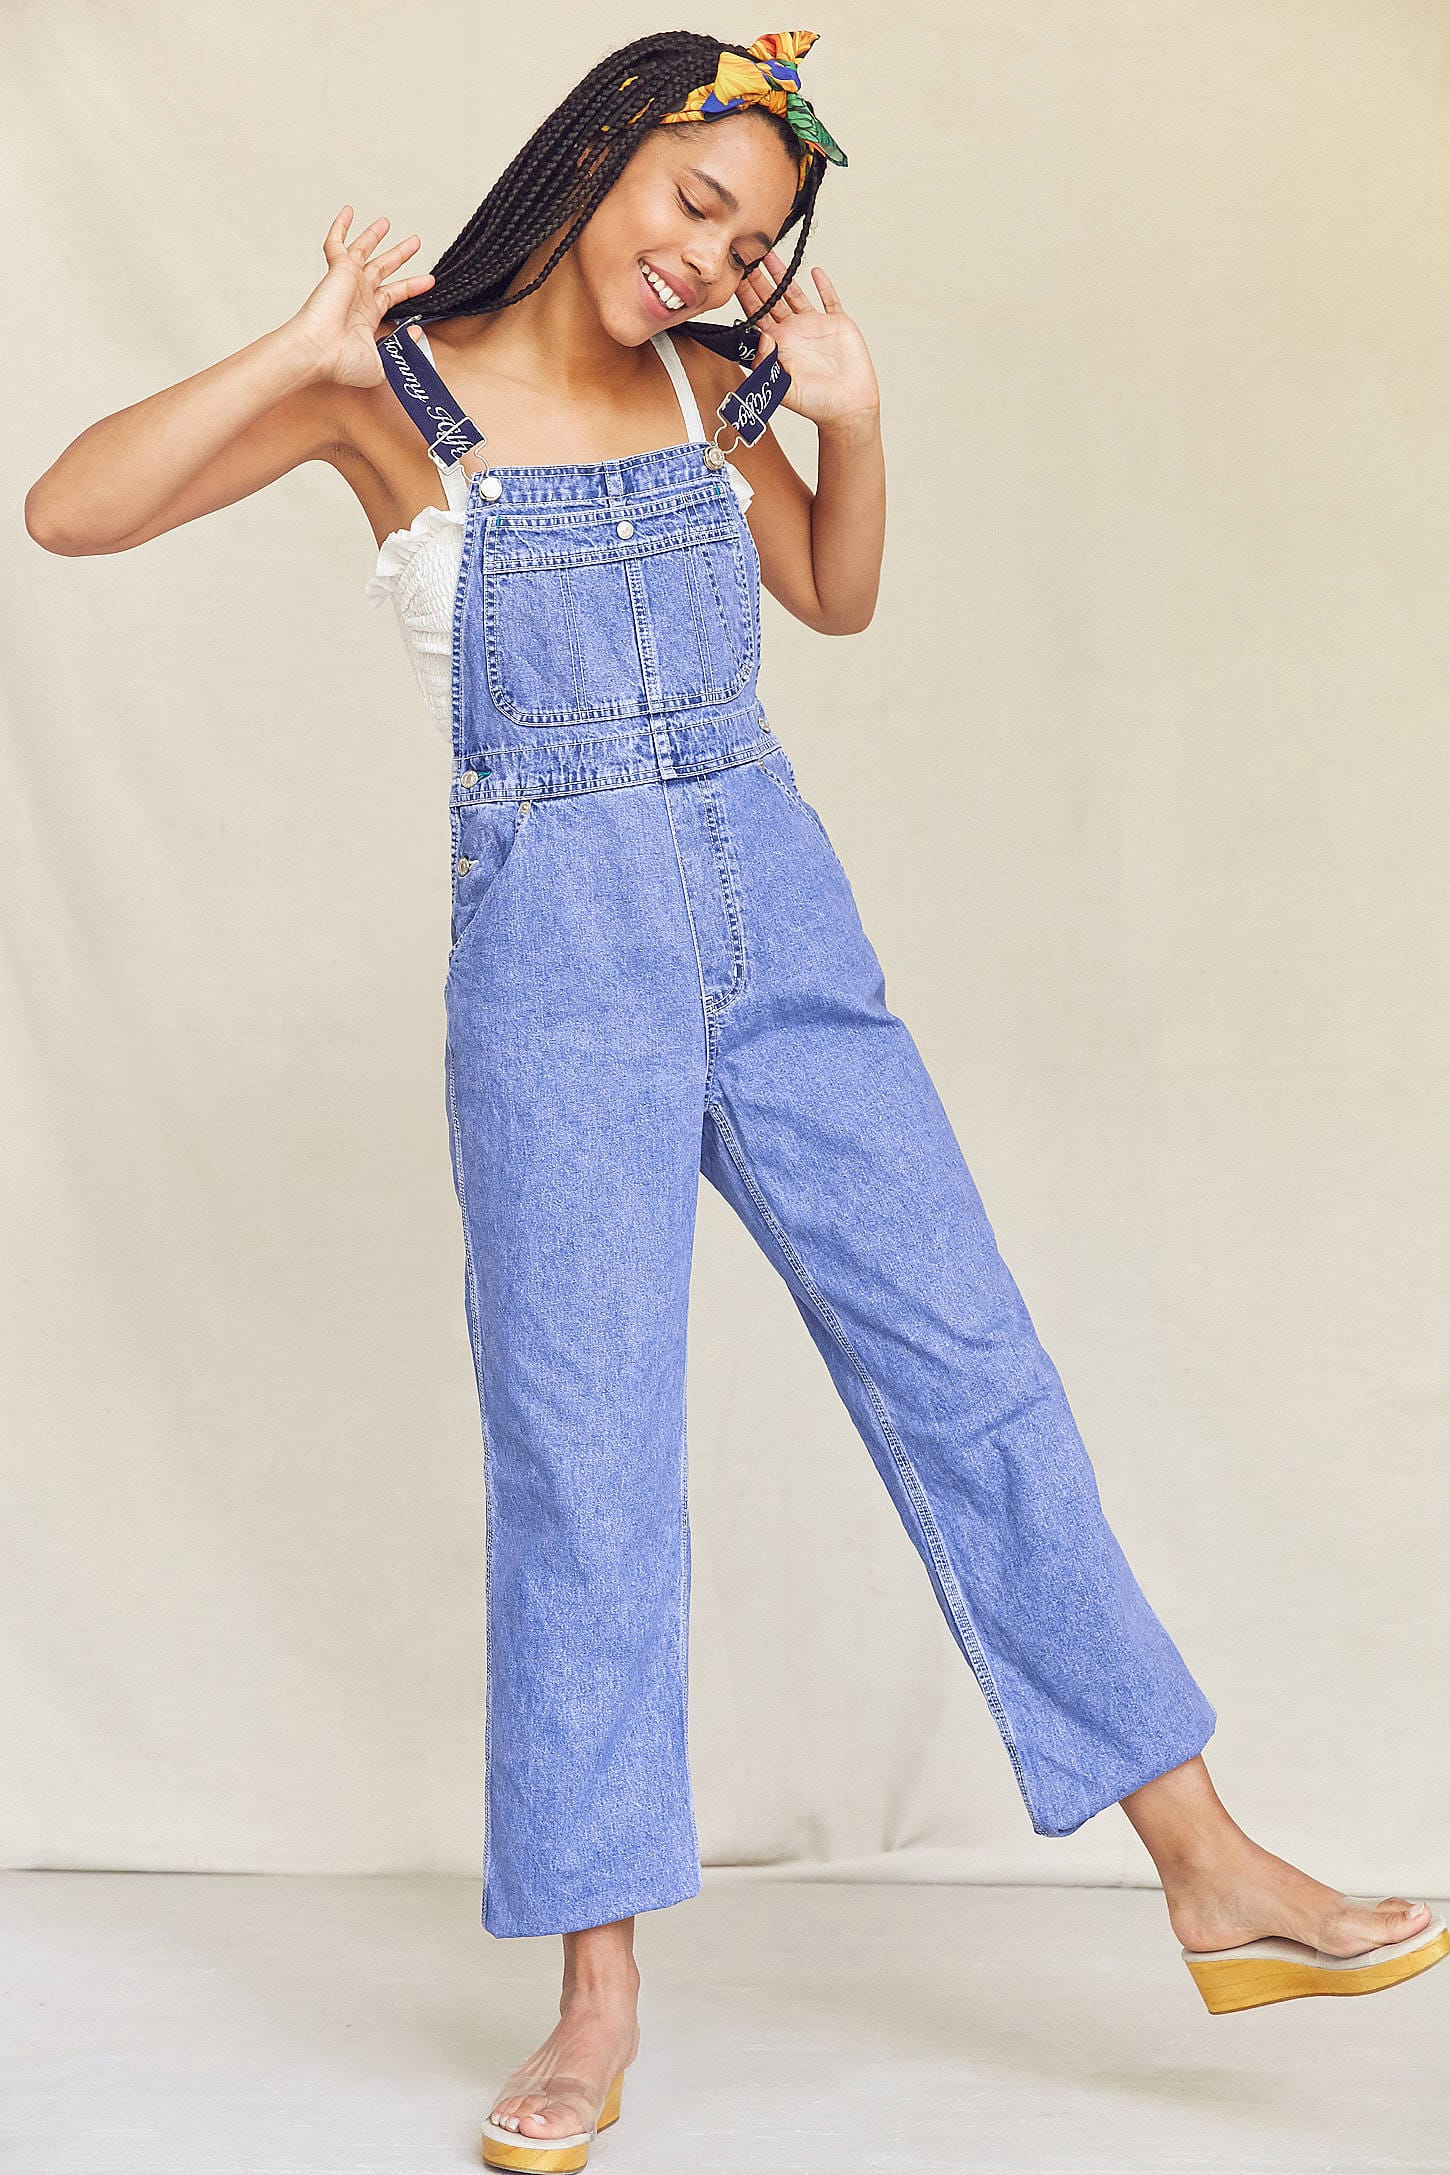 tommy hilfiger womens dungarees